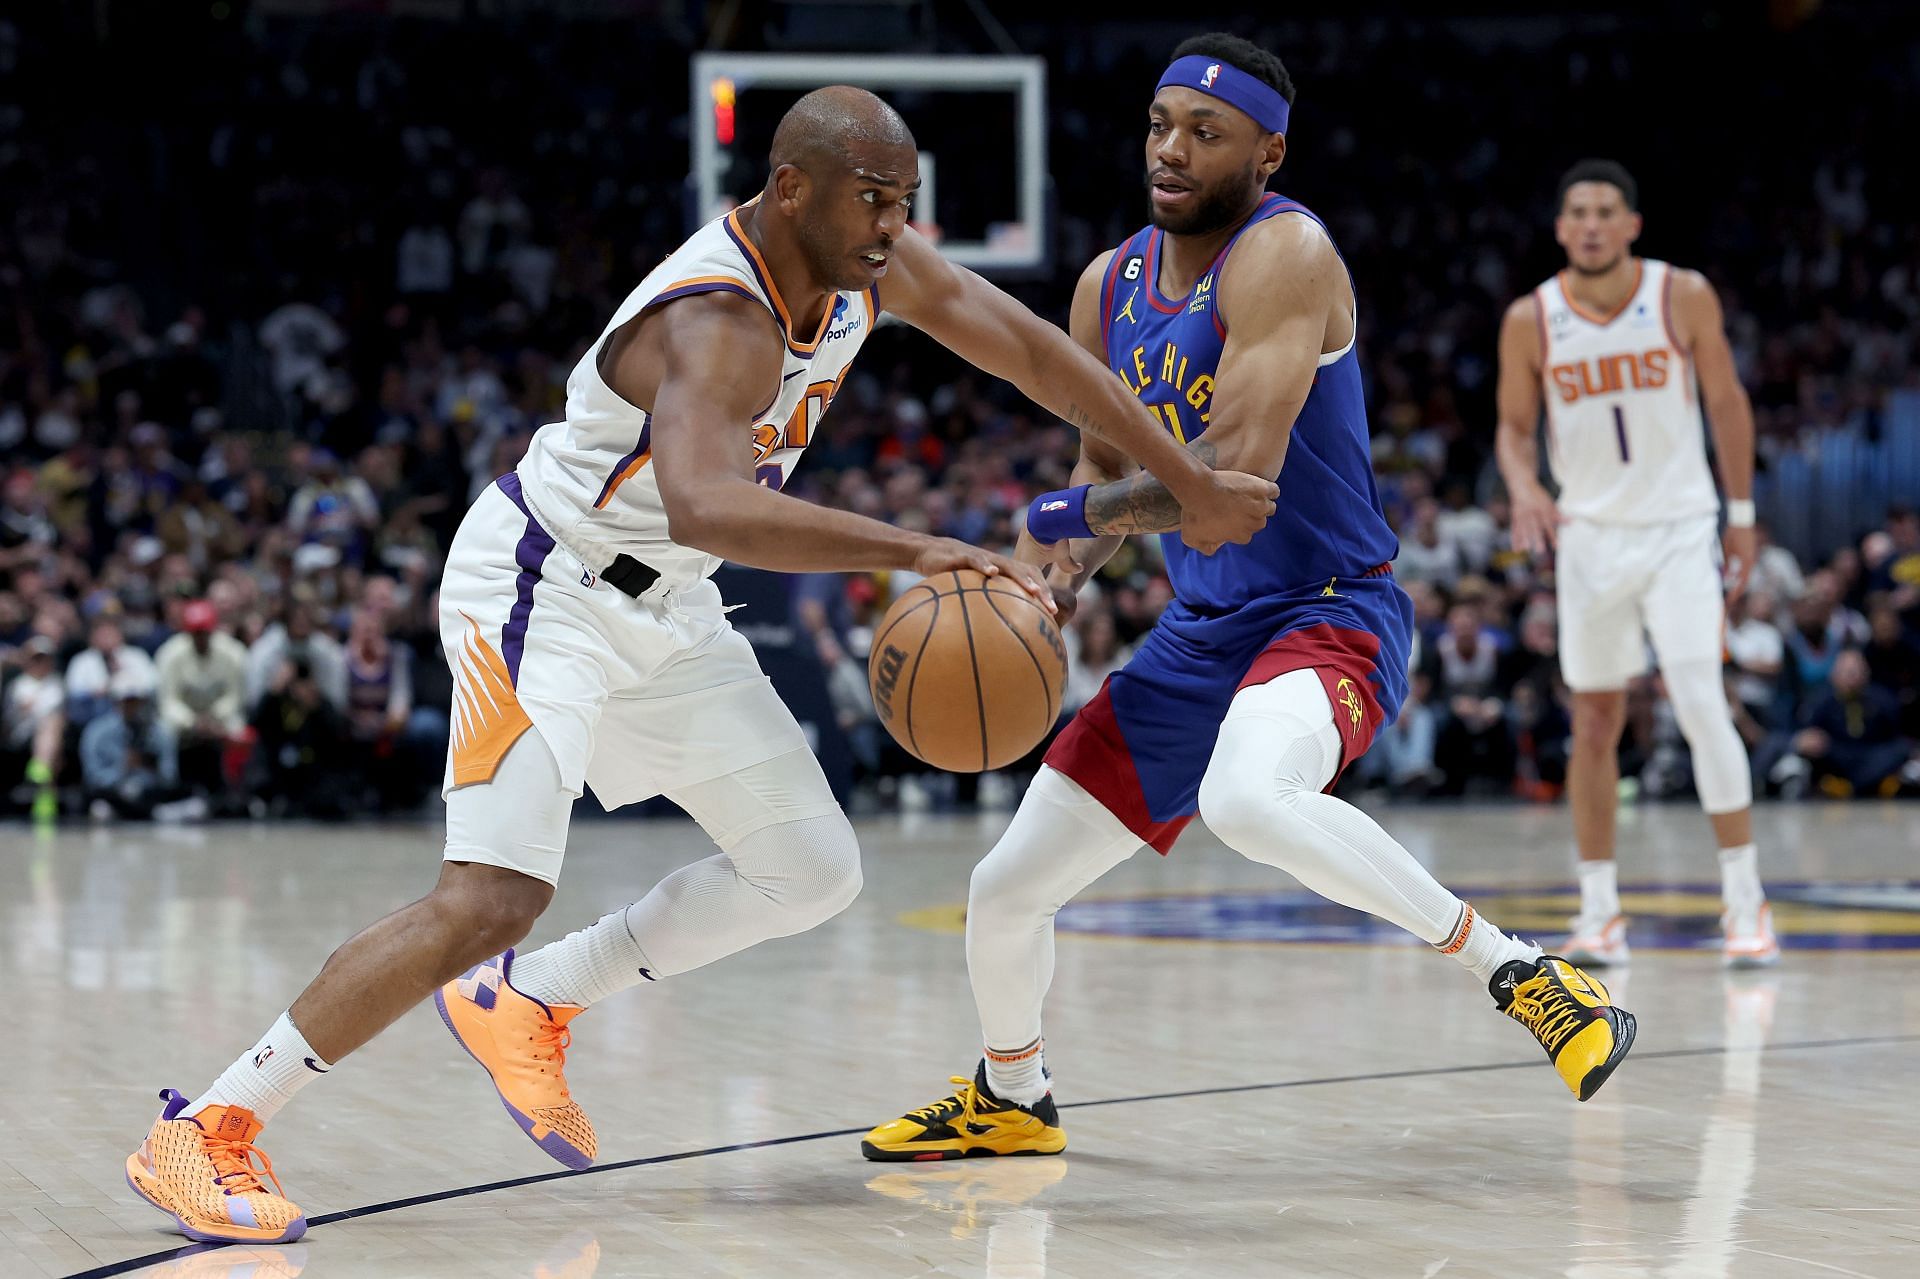 The Chris Paul injury update is not very positive for the Suns (Image via Getty Images)